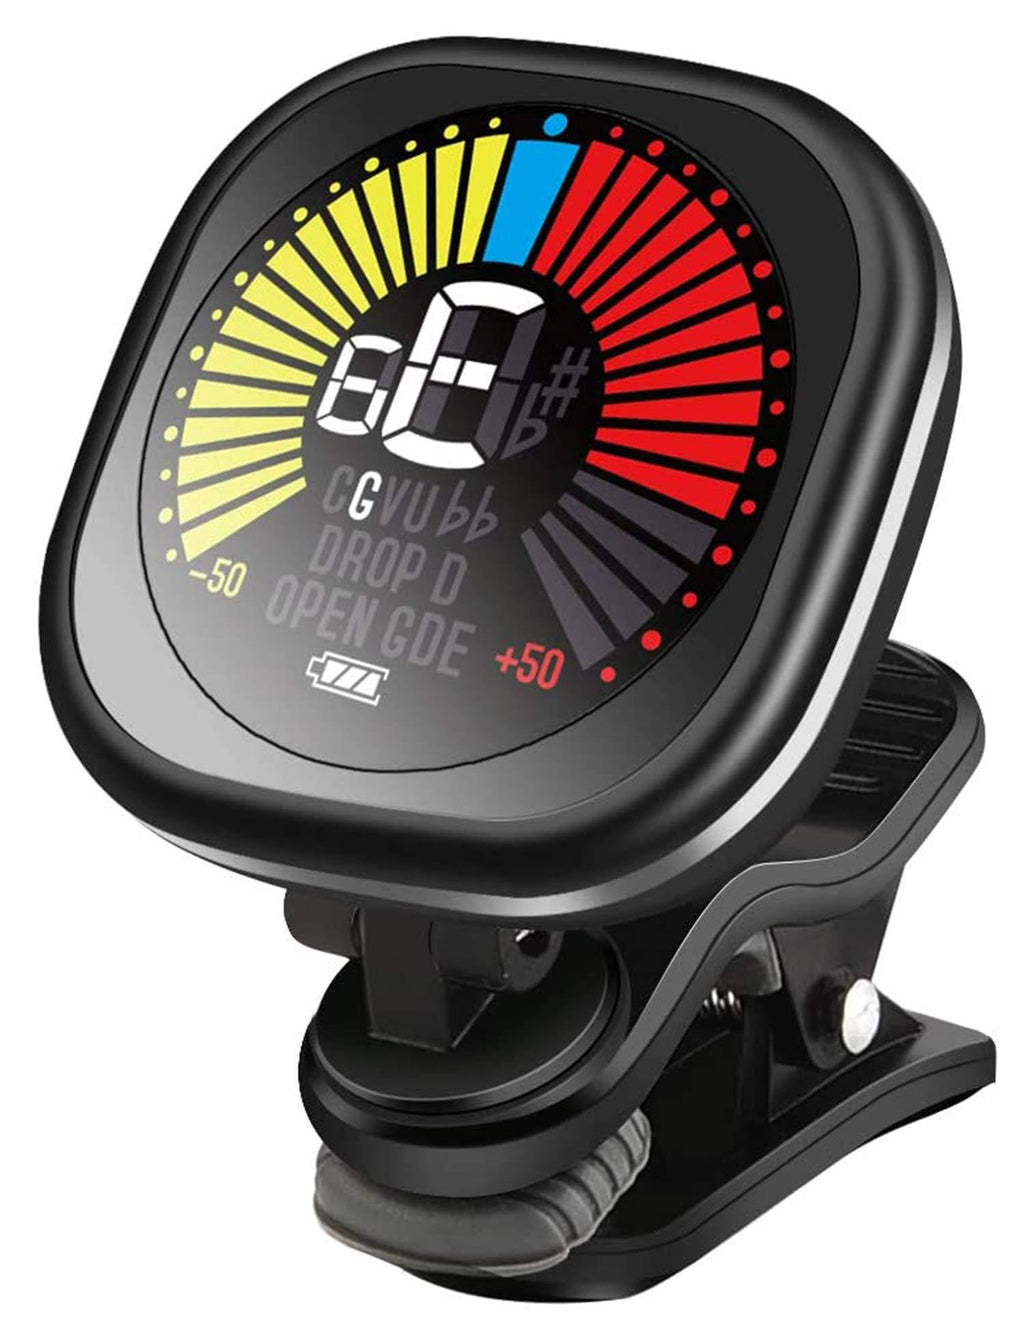 Guitar Tuner Rechargeable Clip On Tuner for Ukulele, Violin and Chromatic Tuning, Fast and Accurate, Easy to Use